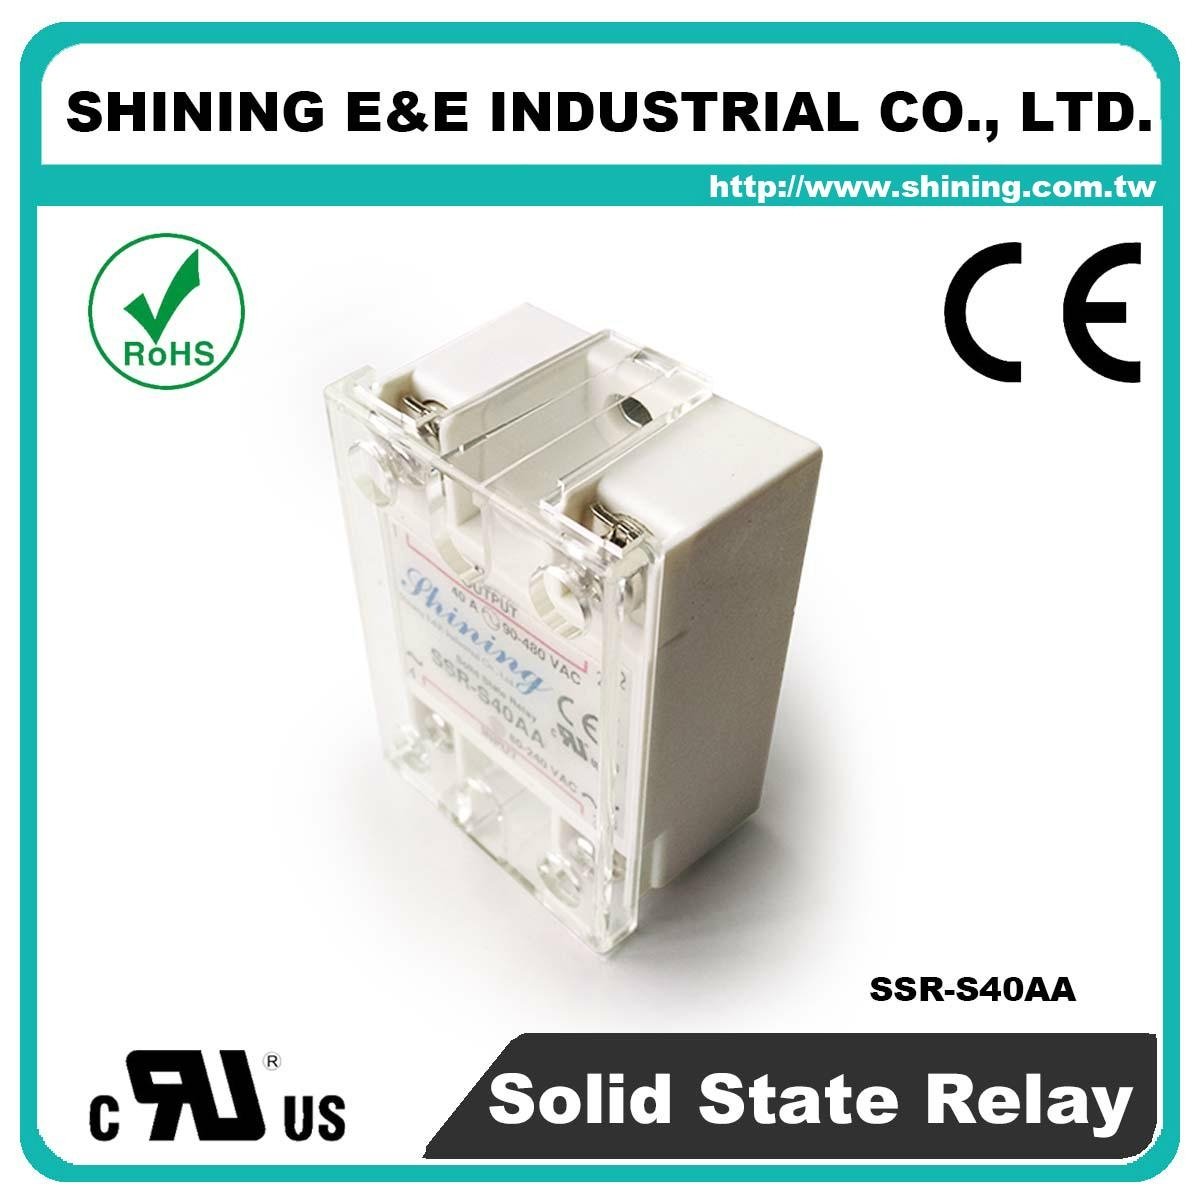 SSR-S40AA Single Phase 40Amp AC to AC Solid State Relays ( SSR ) 2